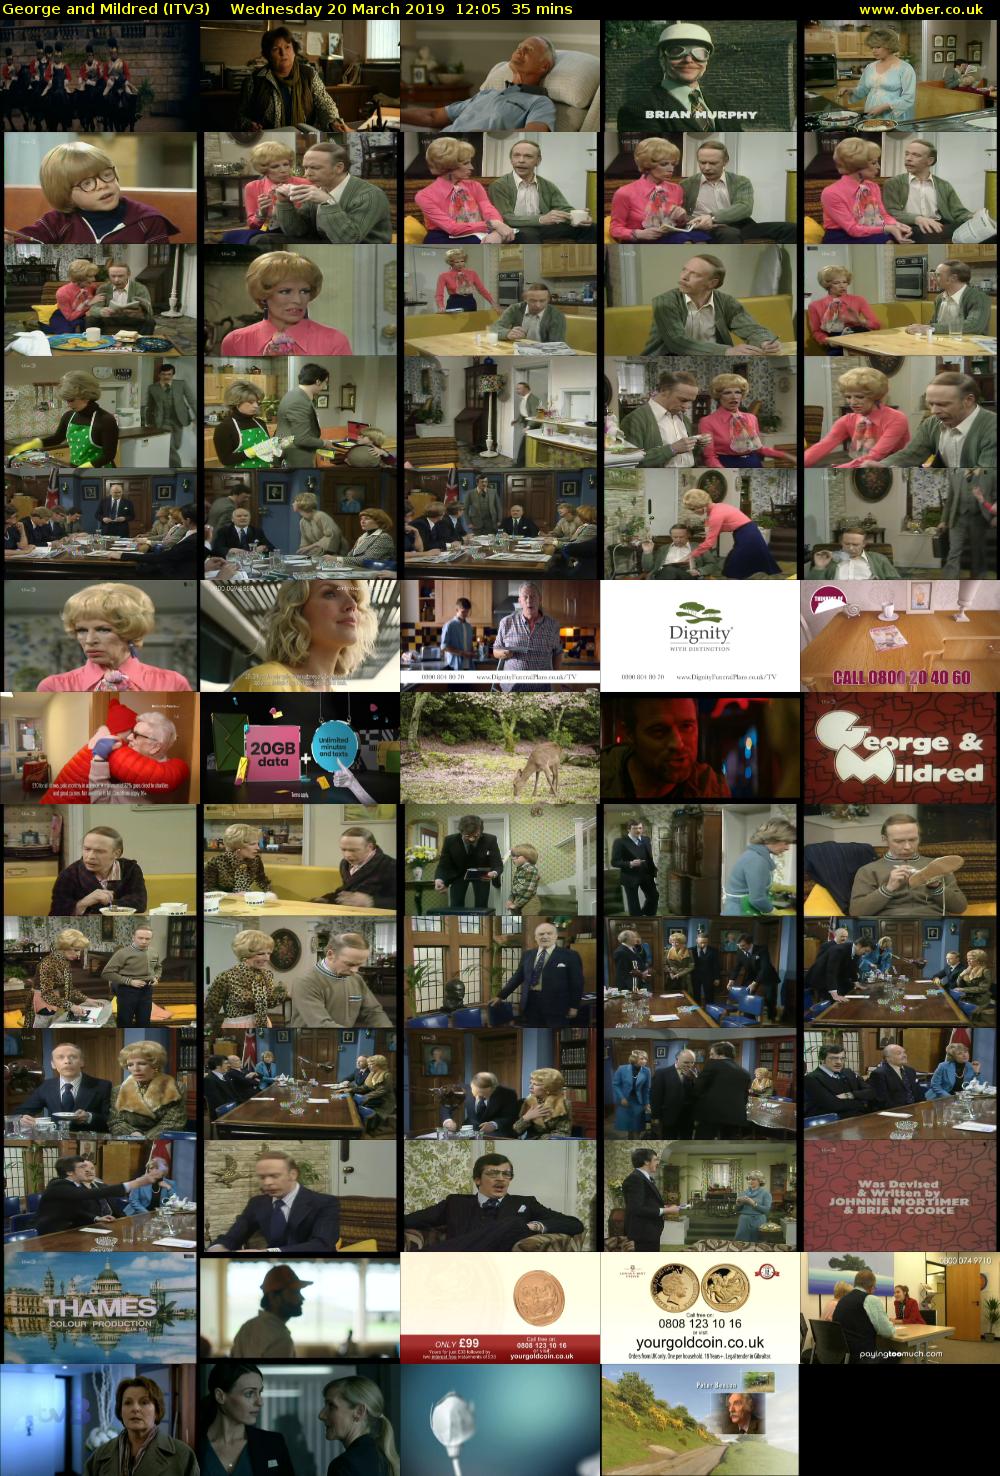 George and Mildred (ITV3) Wednesday 20 March 2019 12:05 - 12:40